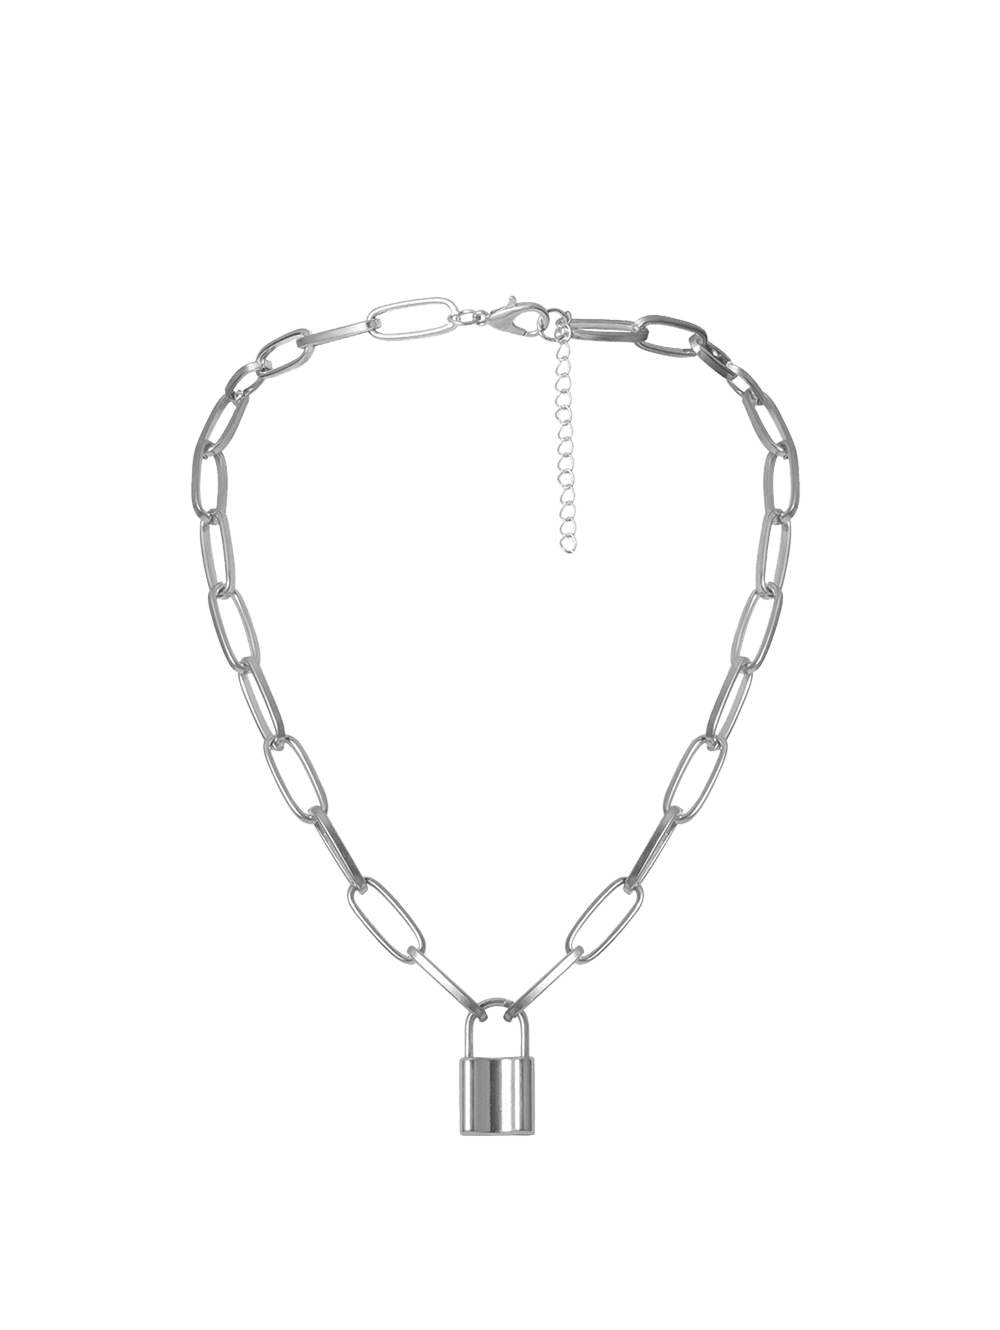 [35% OFF] 2021 Lock Pendant Punk Style Chain Necklace In SILVER | DressLily